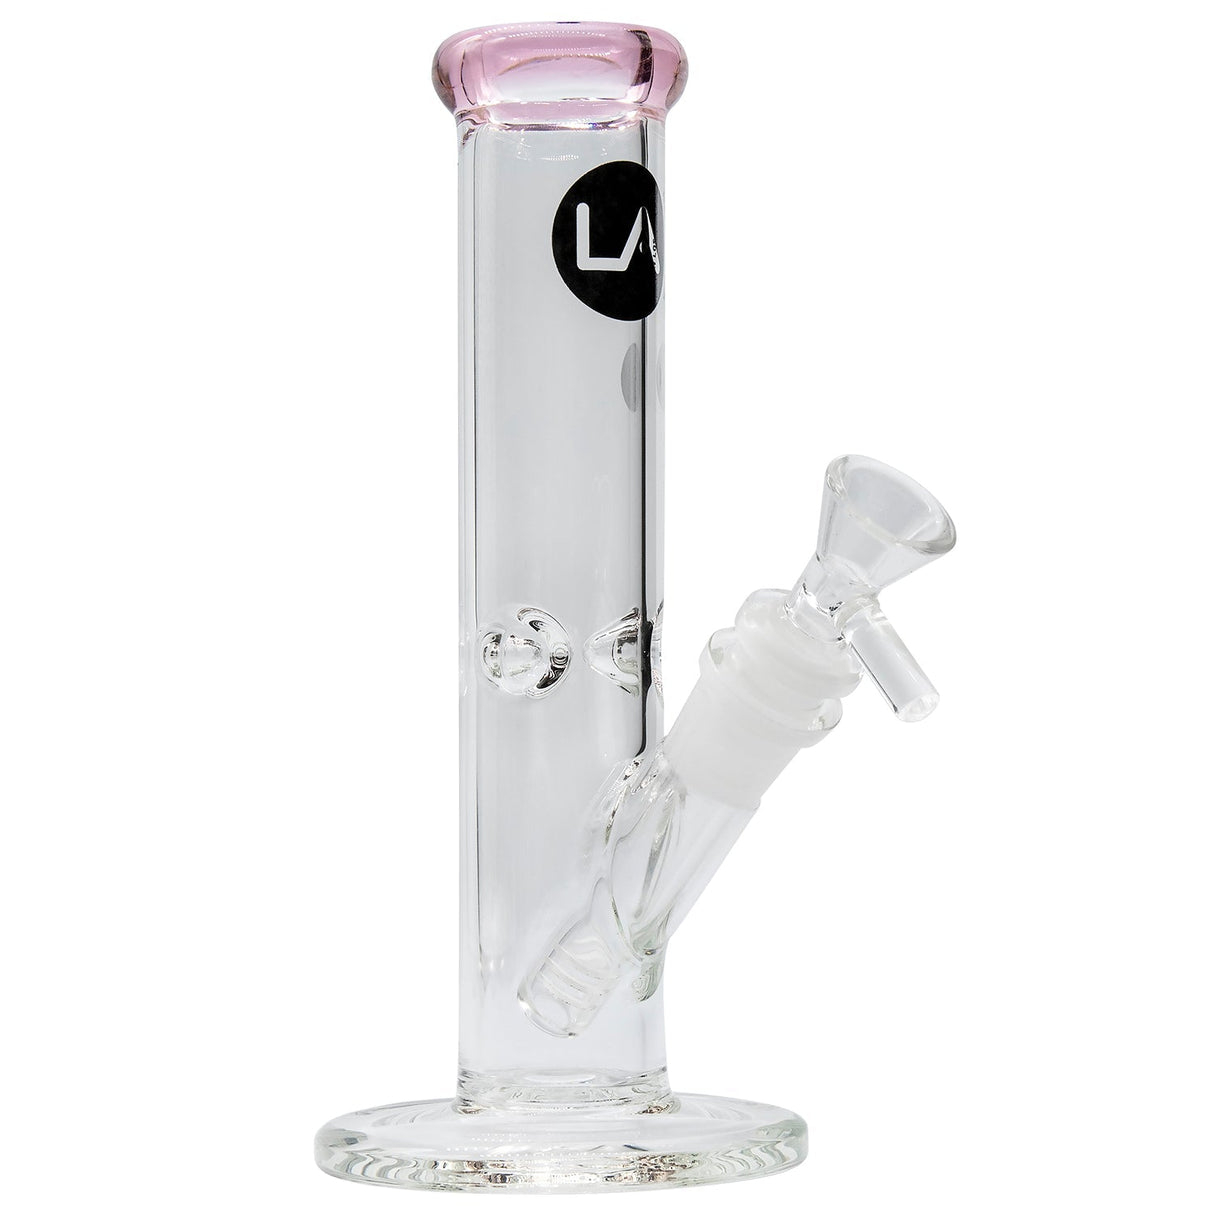 LA Pipes Straight Shooter Bong in Pink Gem, 8" Borosilicate Glass, Front View